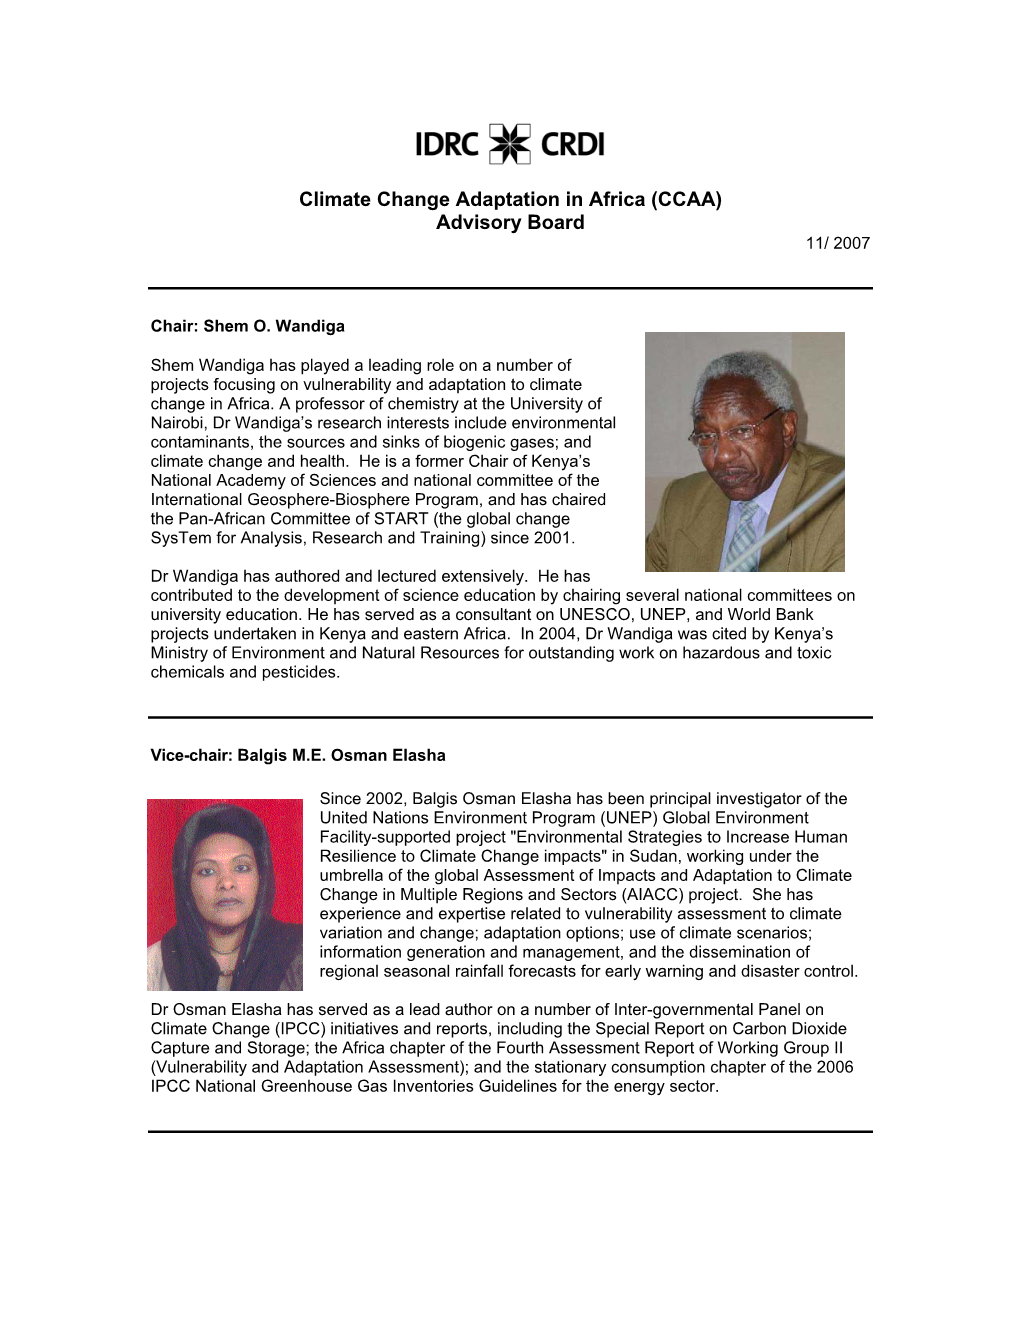 Climate Change Adaptation in Africa (CCAA) Advisory Board 11/ 2007